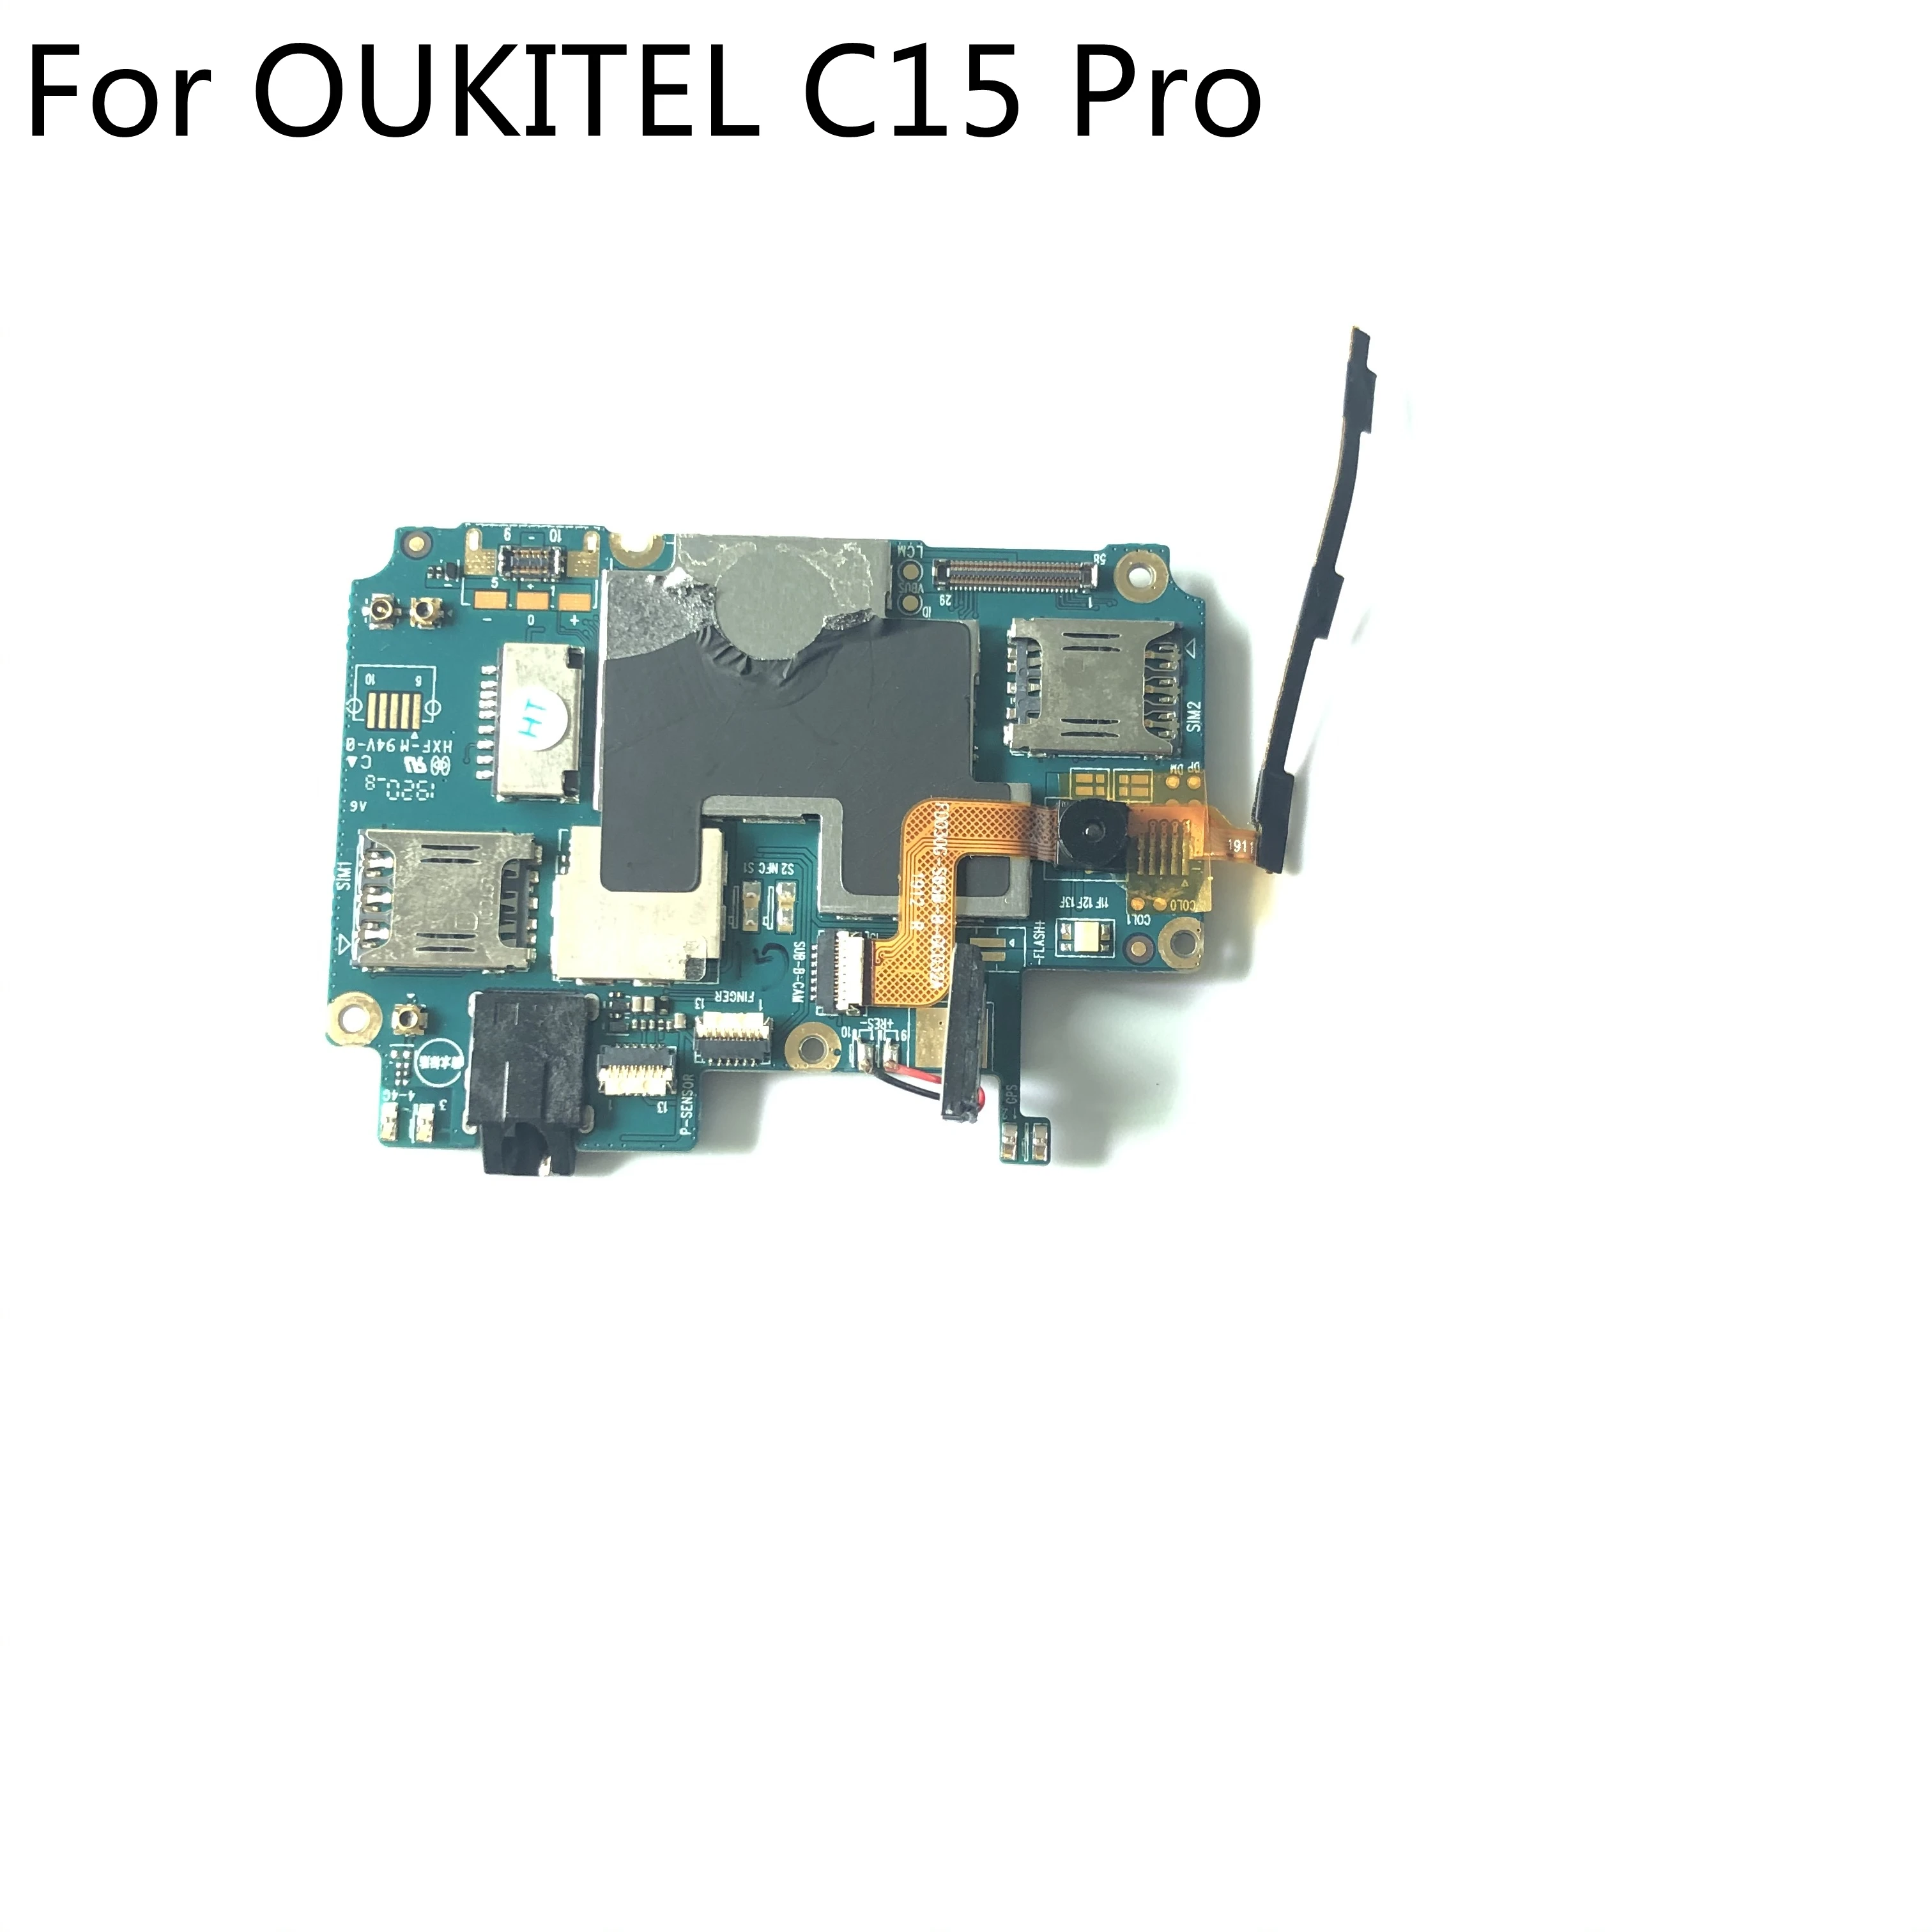 

OUKITEL C15 Pro Used Mainboard 3G RAM+32G ROM Motherboard For OUKITEL C15 Pro MT6761 Quad Core 6.088'' 1280*600 Smartphone